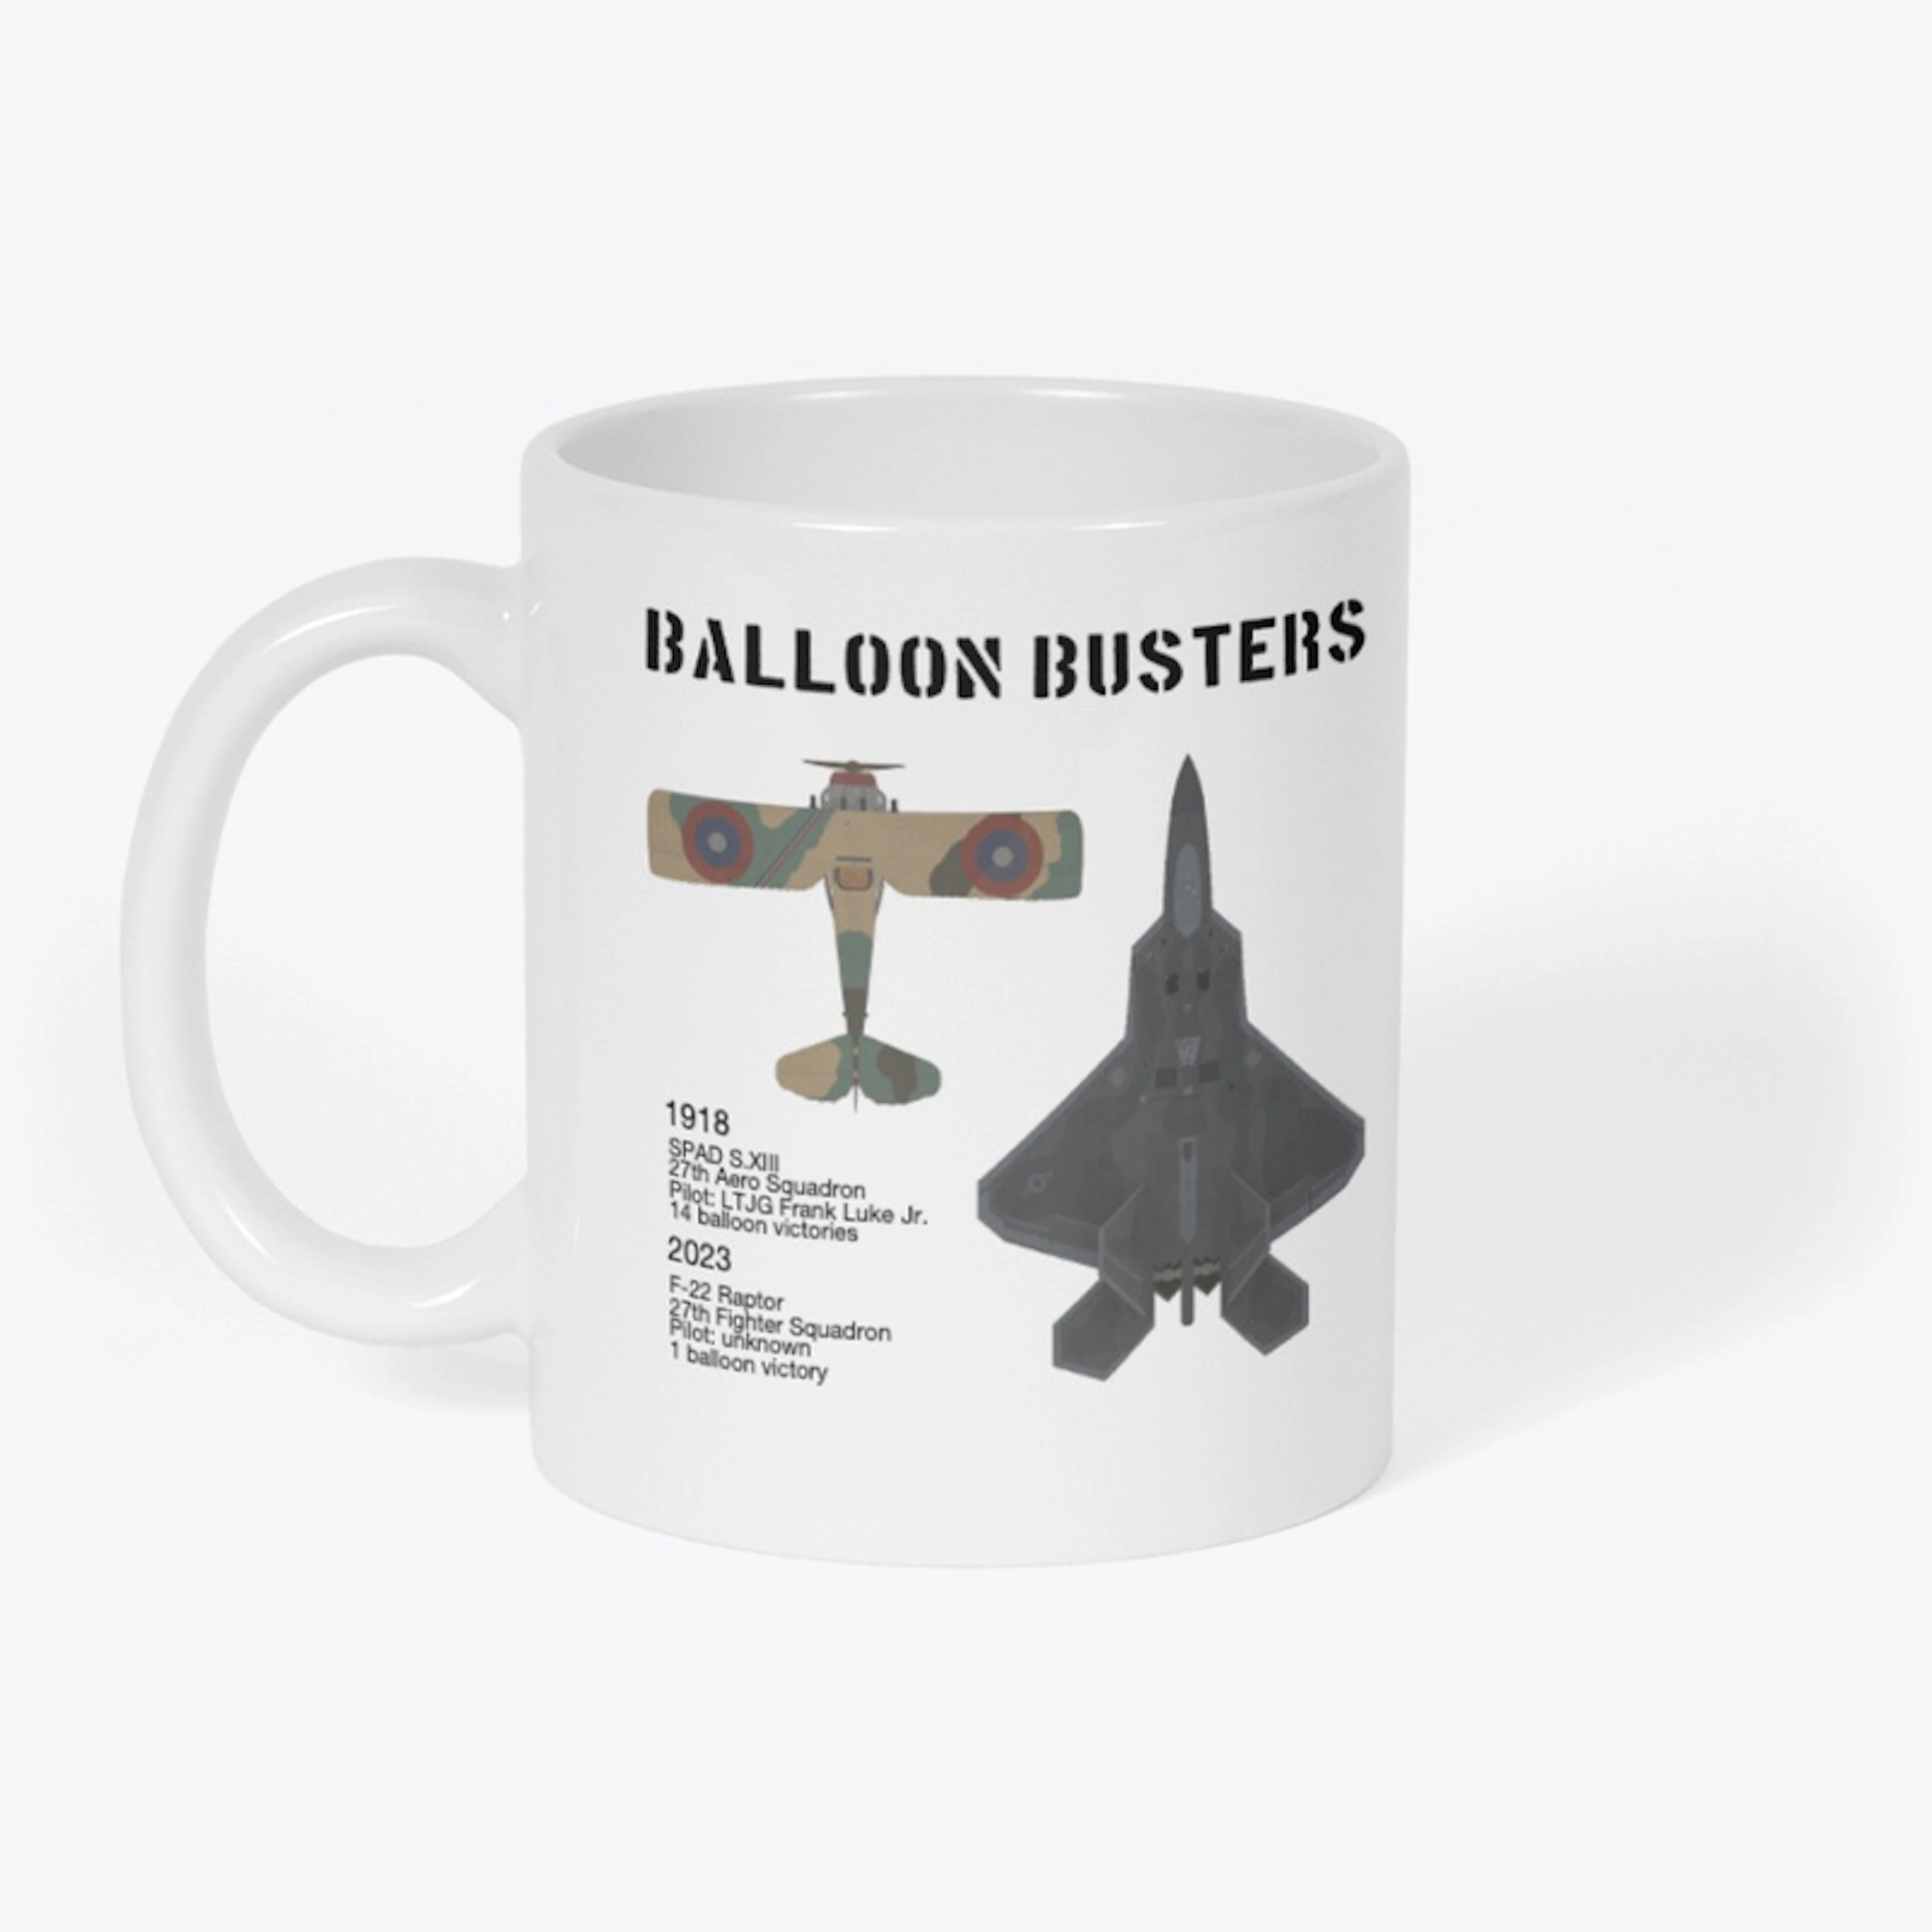 Balloon Busters